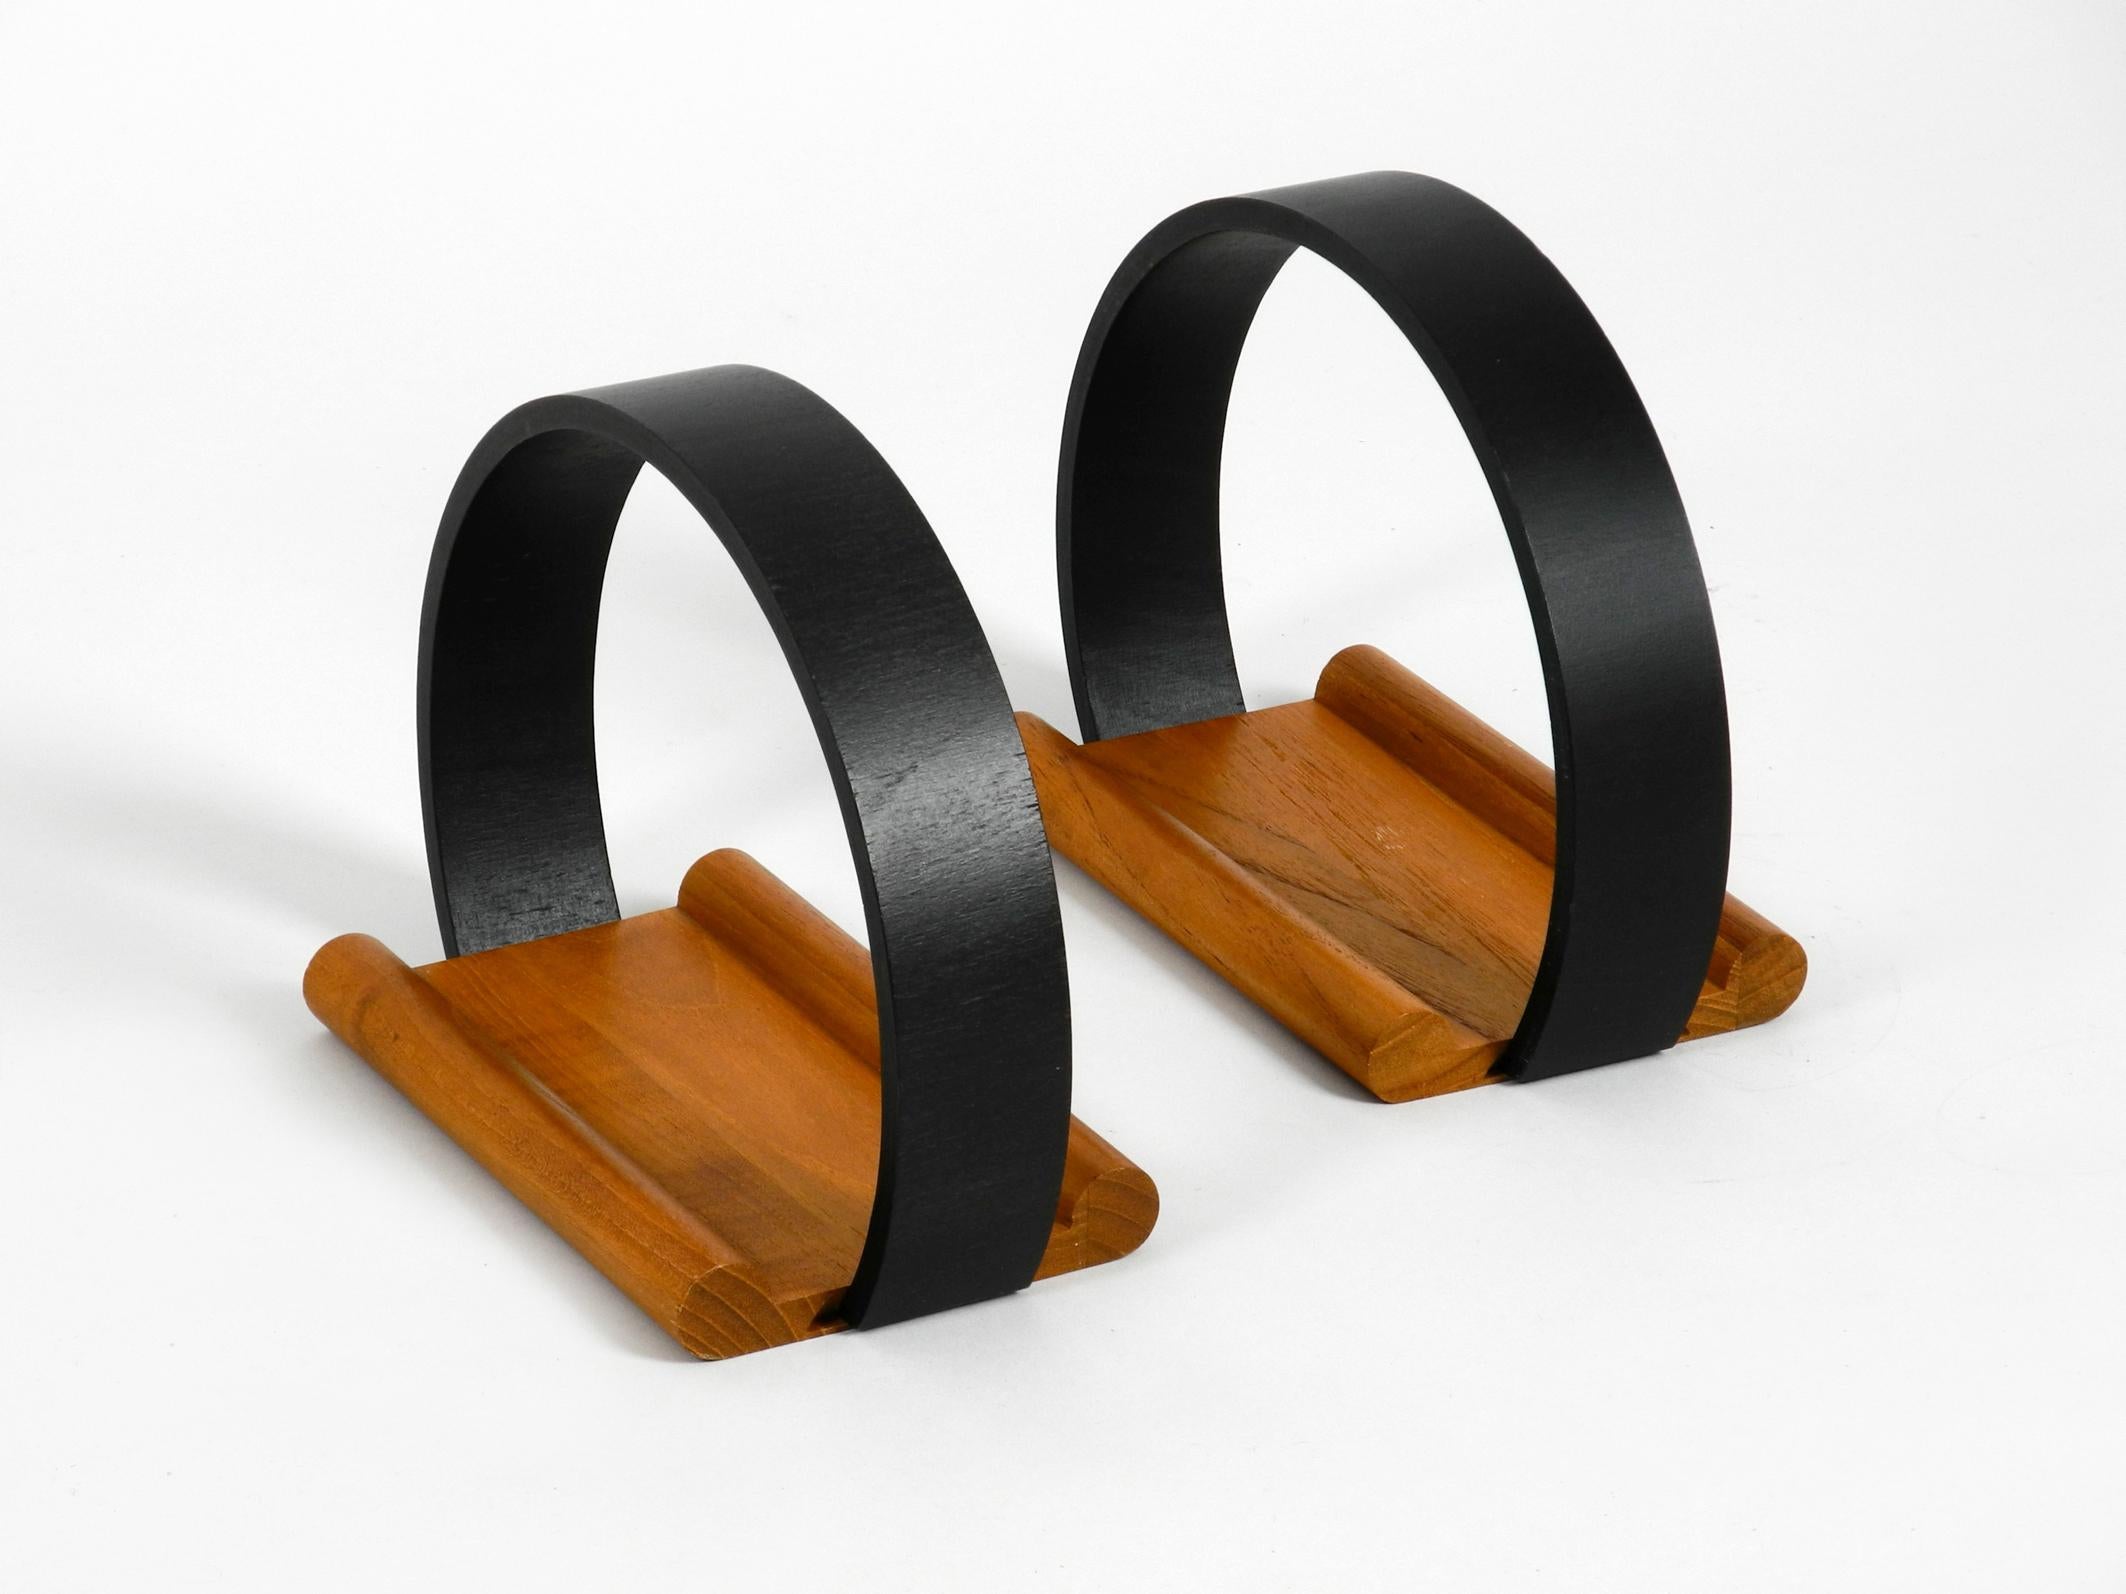 Nice table shelf for salt and pepper from the 1960s.
Teak tray, curved plywood handle.
Design by Richard Nissen. Made in Denmark.
Very high quality table decoration. 
Can also be used as a storage for other things.
Very well preserved, just a